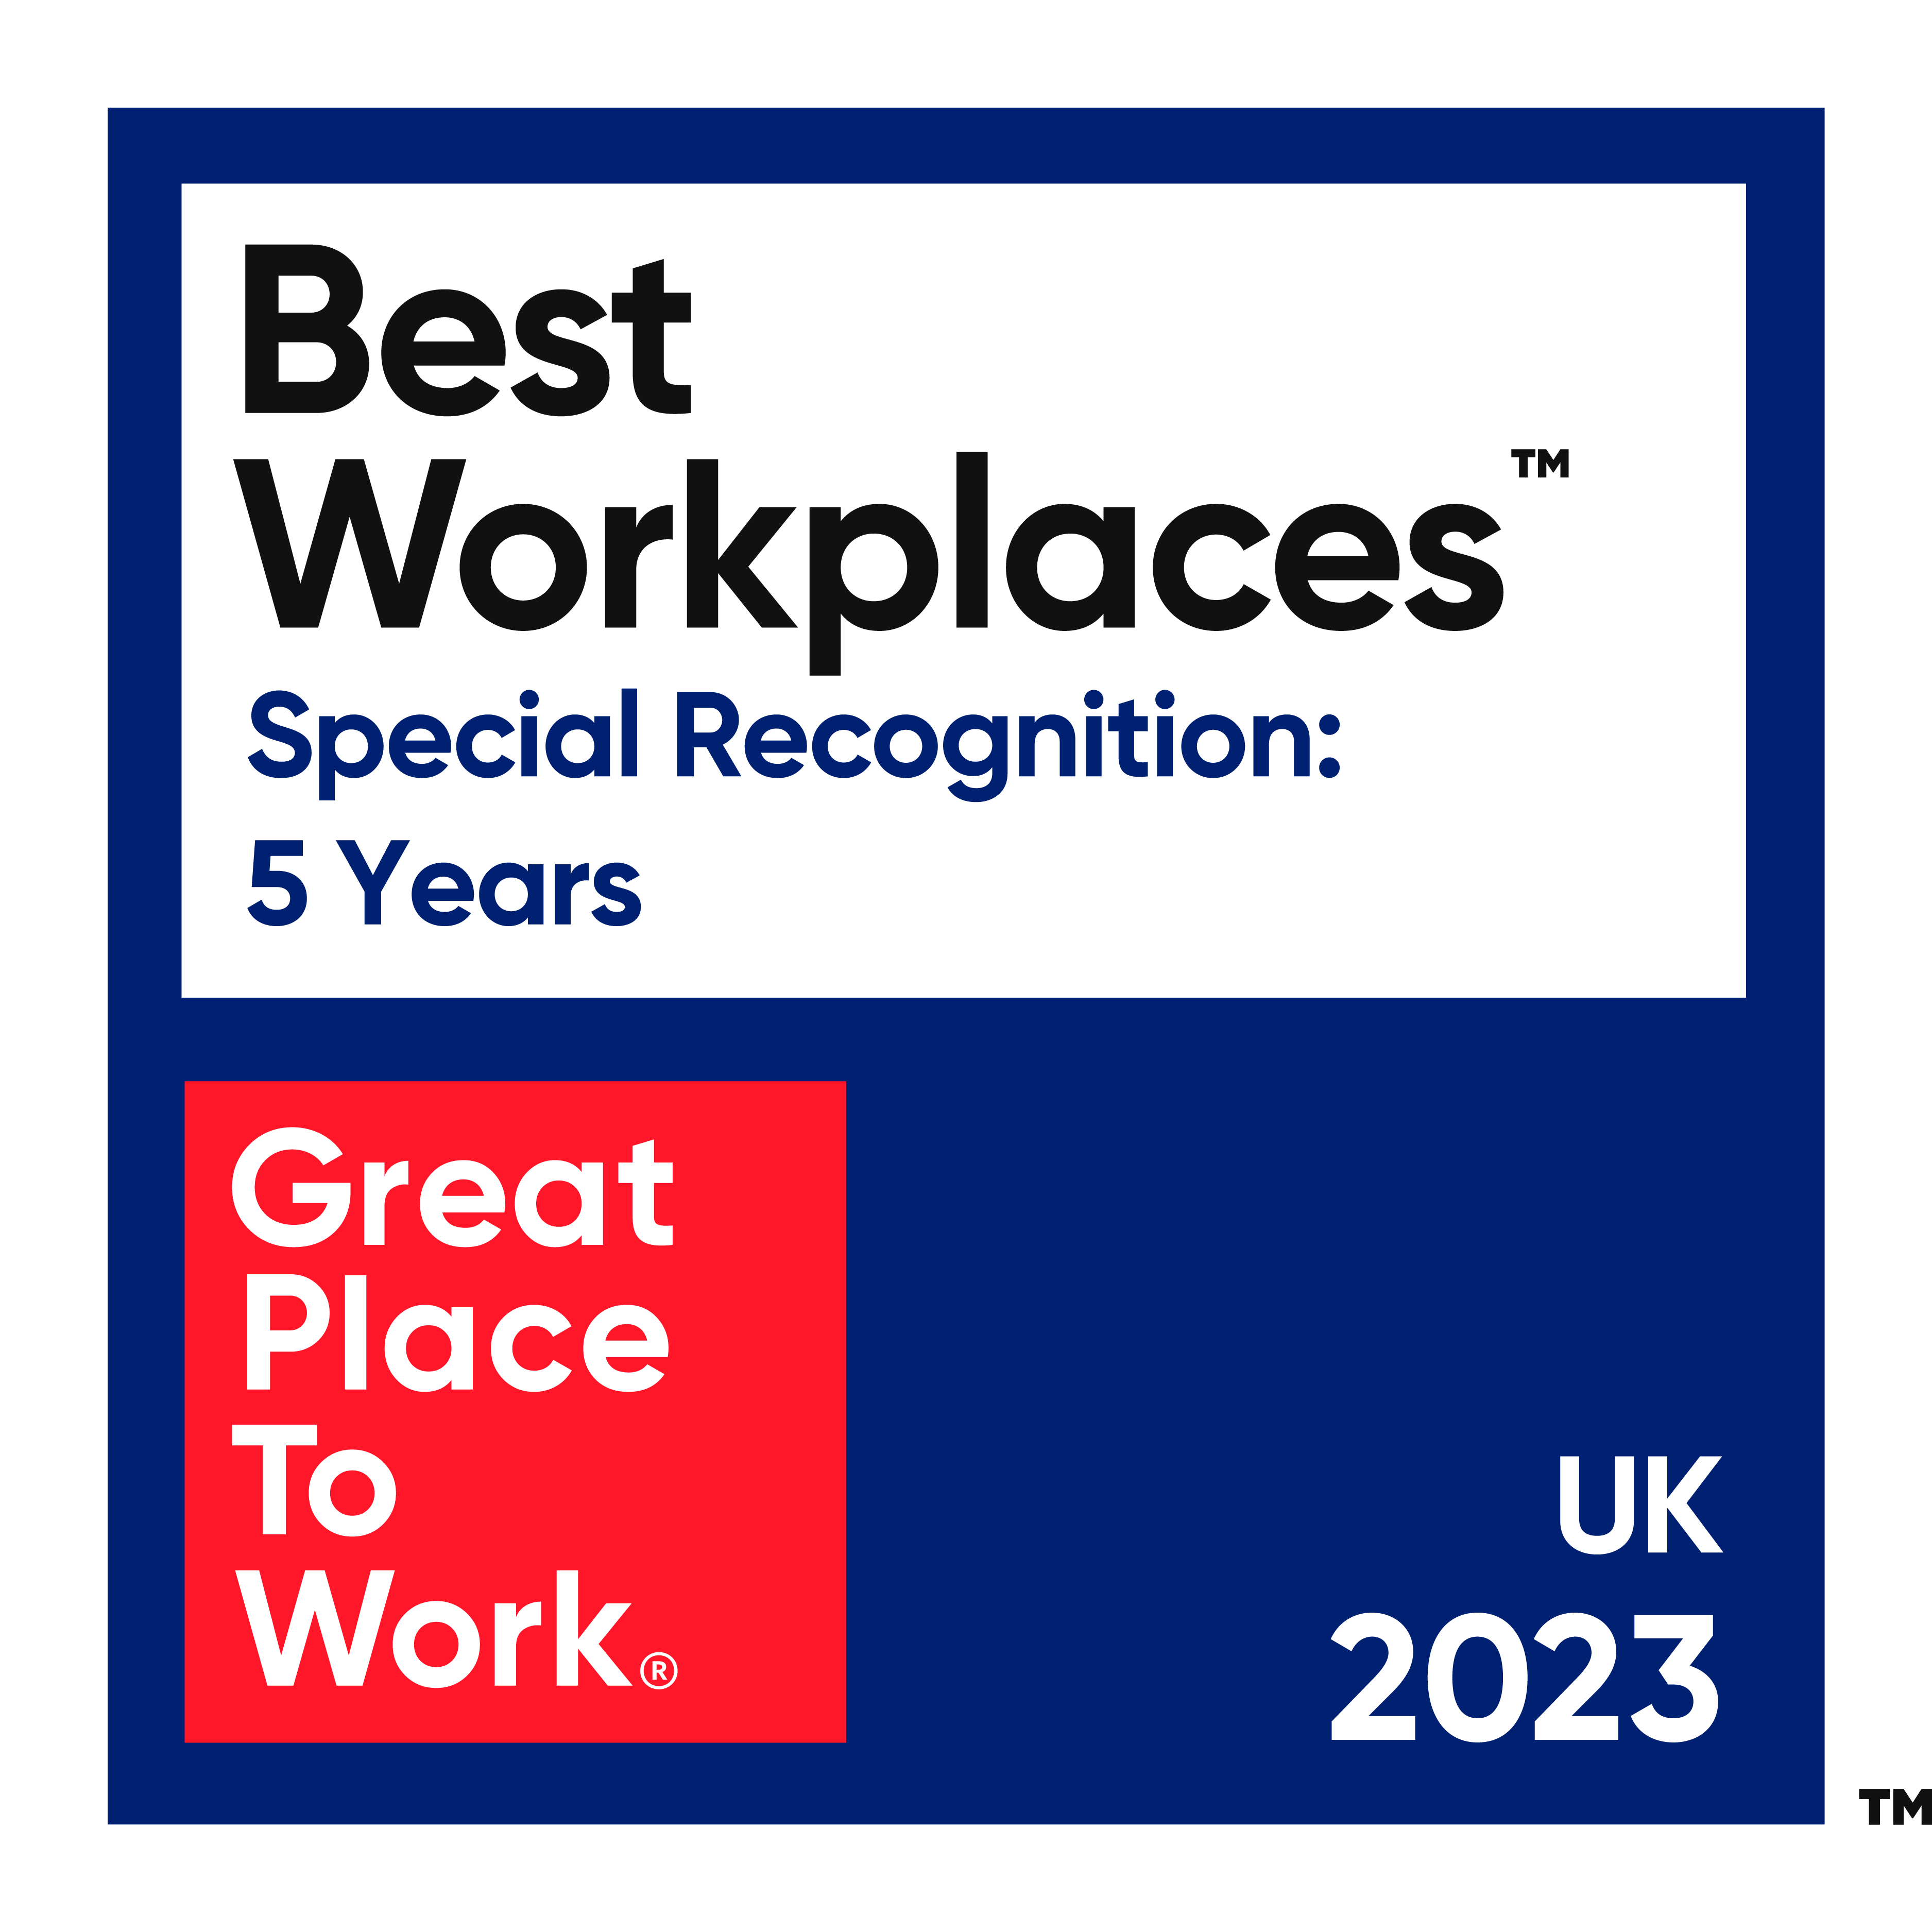 Great Place To Work UK 2023 badge